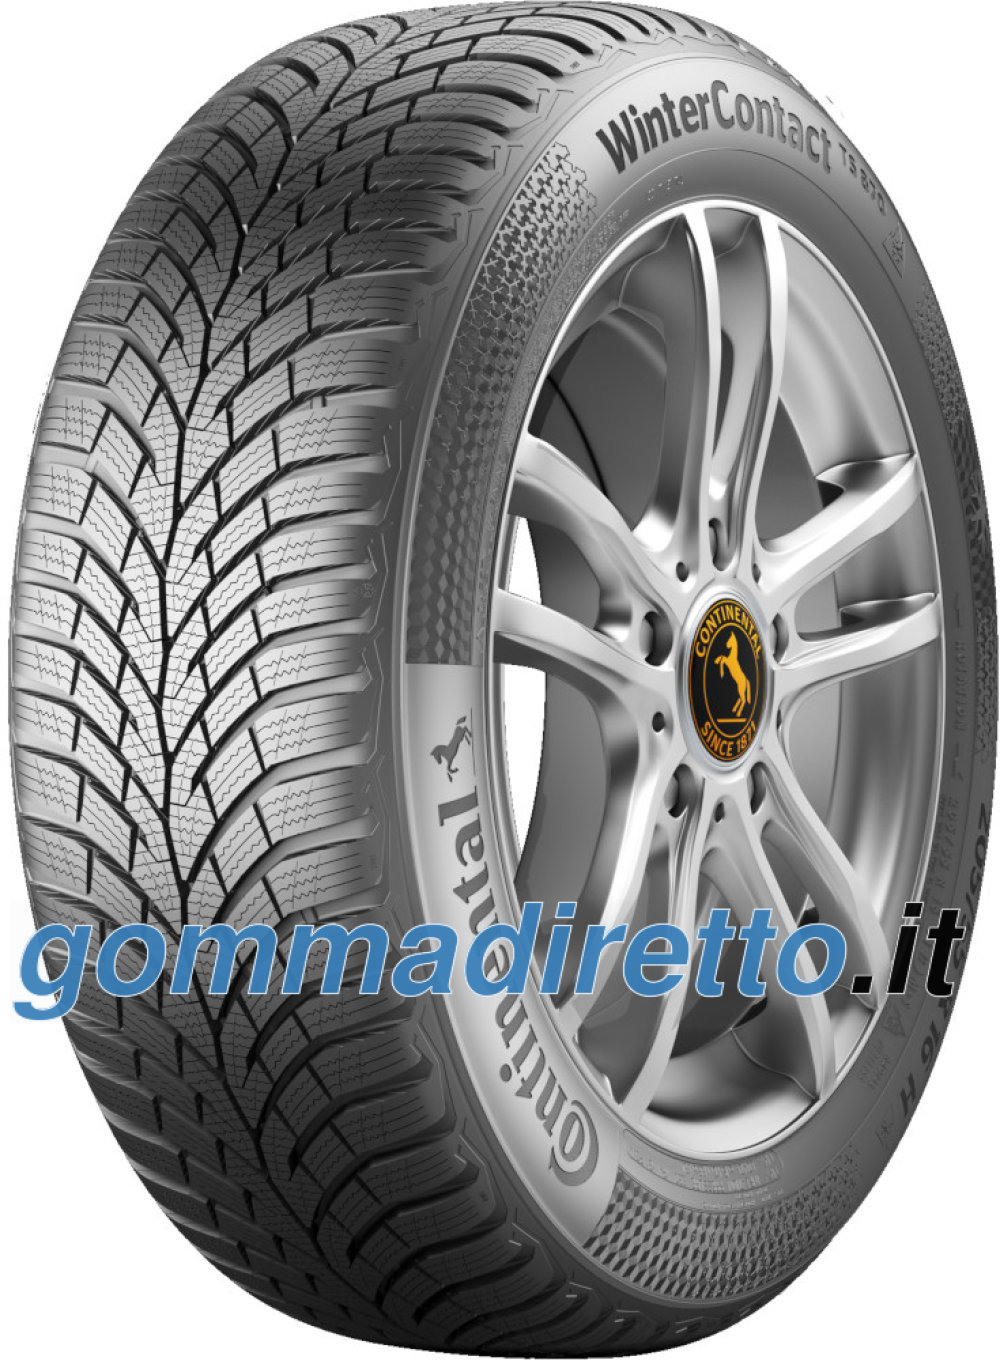 Image of Continental WinterContact TS 870 ( 155/70 R19 88T XL EVc )